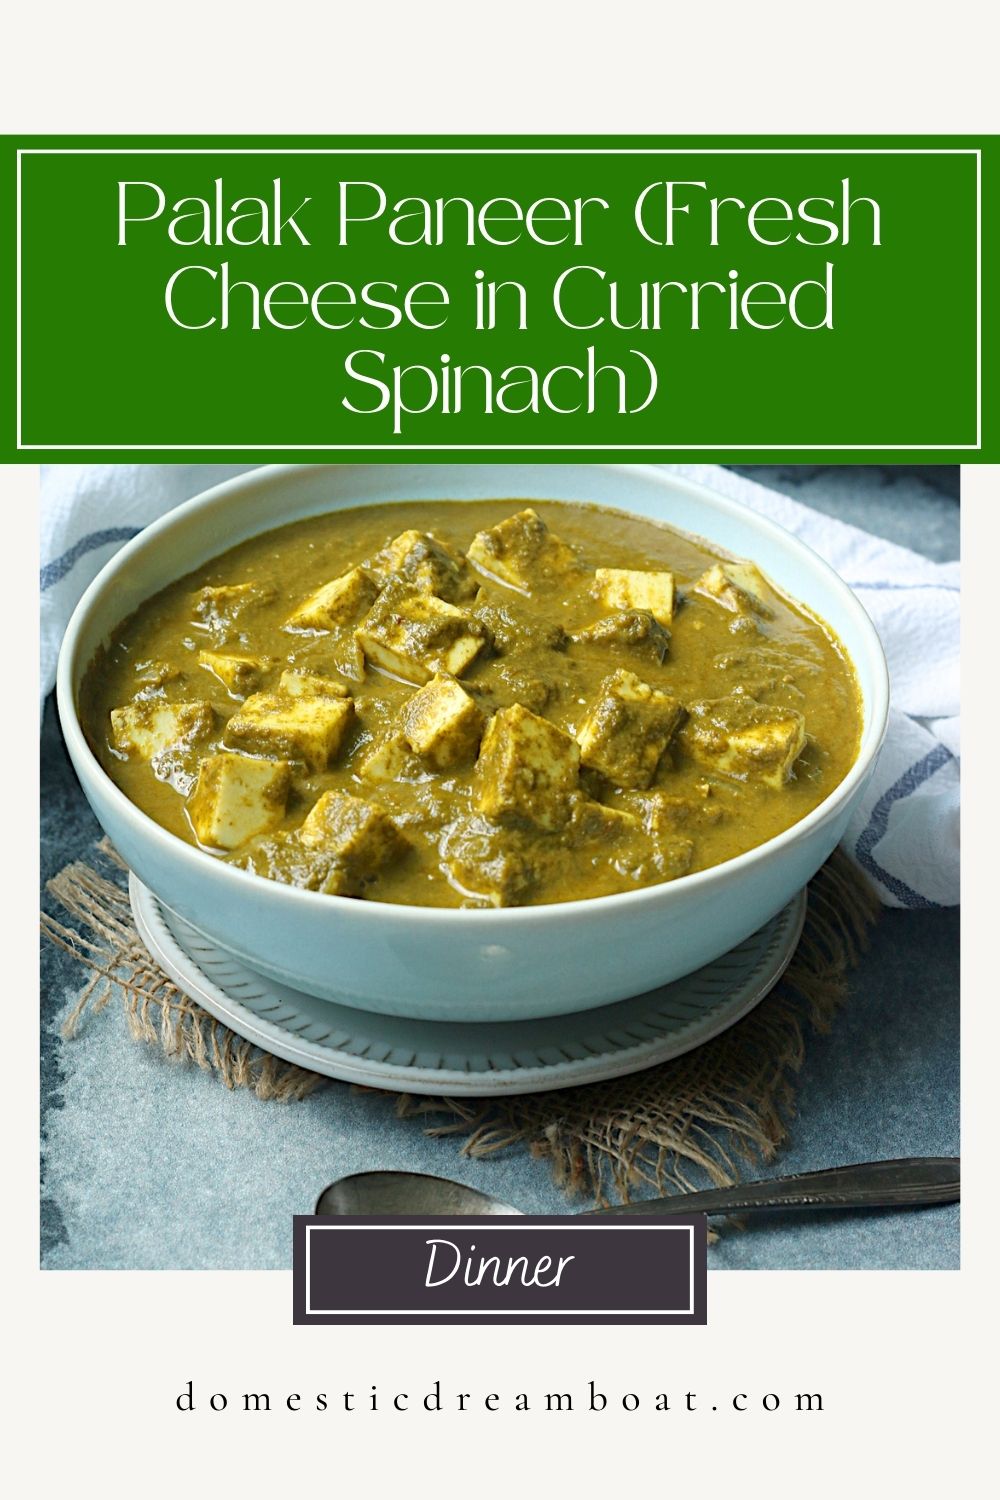 Palak Paneer Fresh Cheese in Curried Spinach